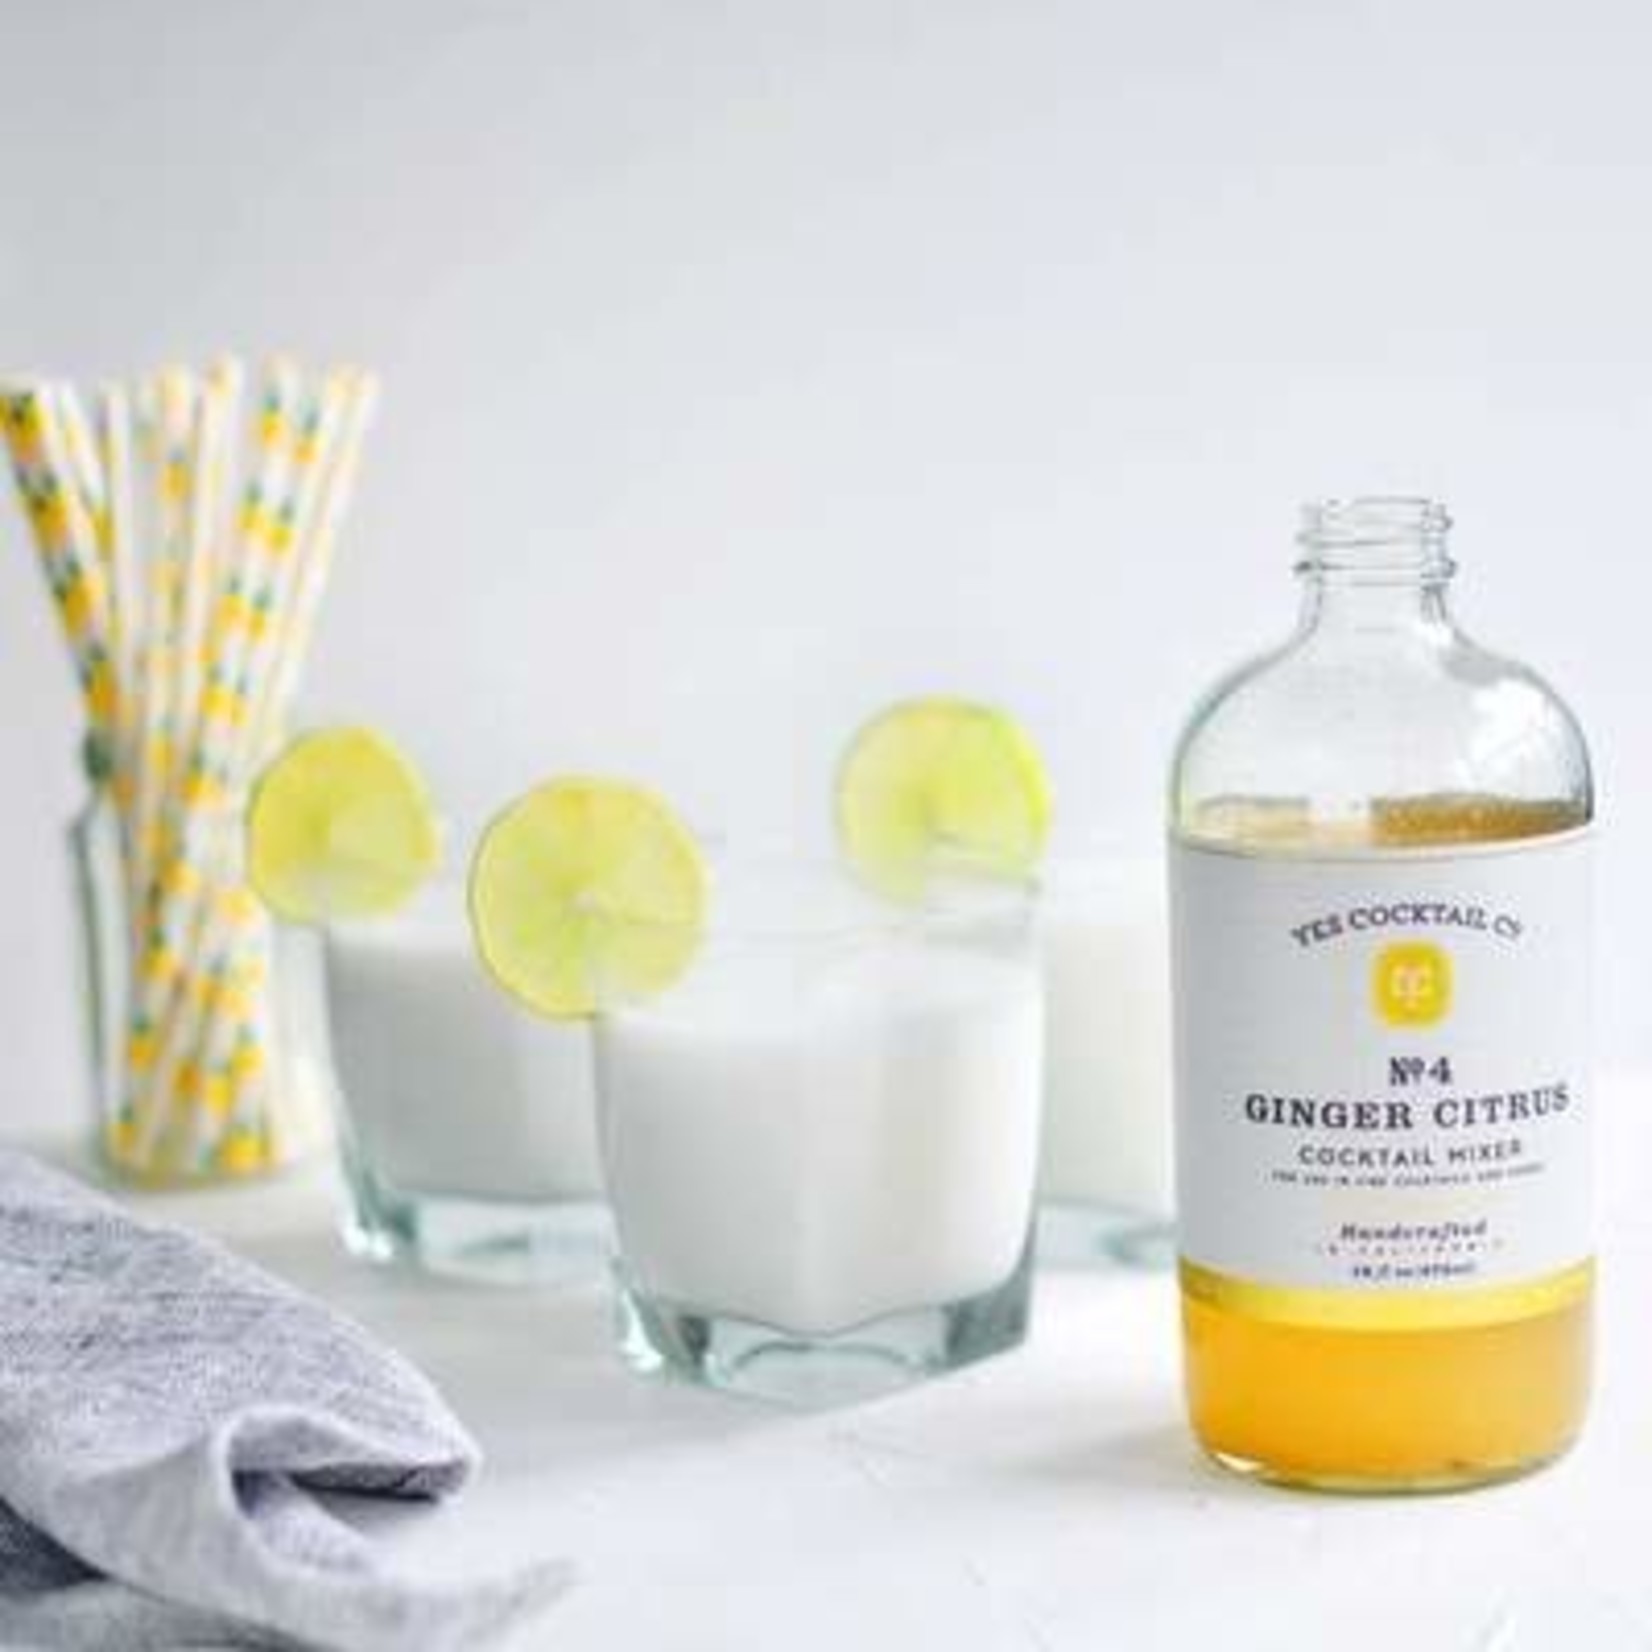 YES! Cocktails Ginger Citrus Cocktail Mixer